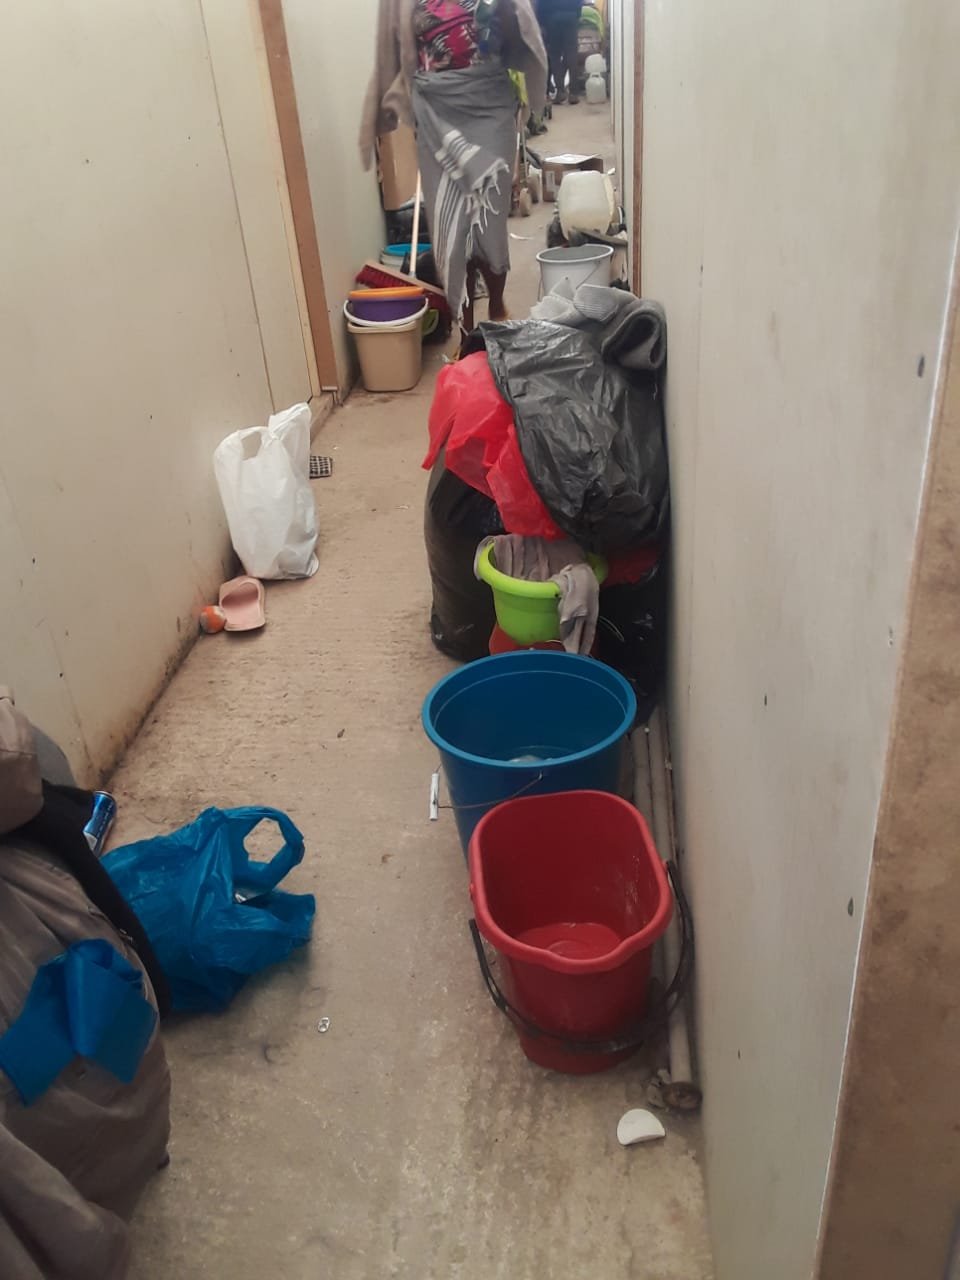 "The toilets we use are so dirty that we are afraid of catching infections. So we relieve ourselves in a bucket, behind the tent, sometimes in front of men passing by," saysThéthé Kongé | Photo: Private